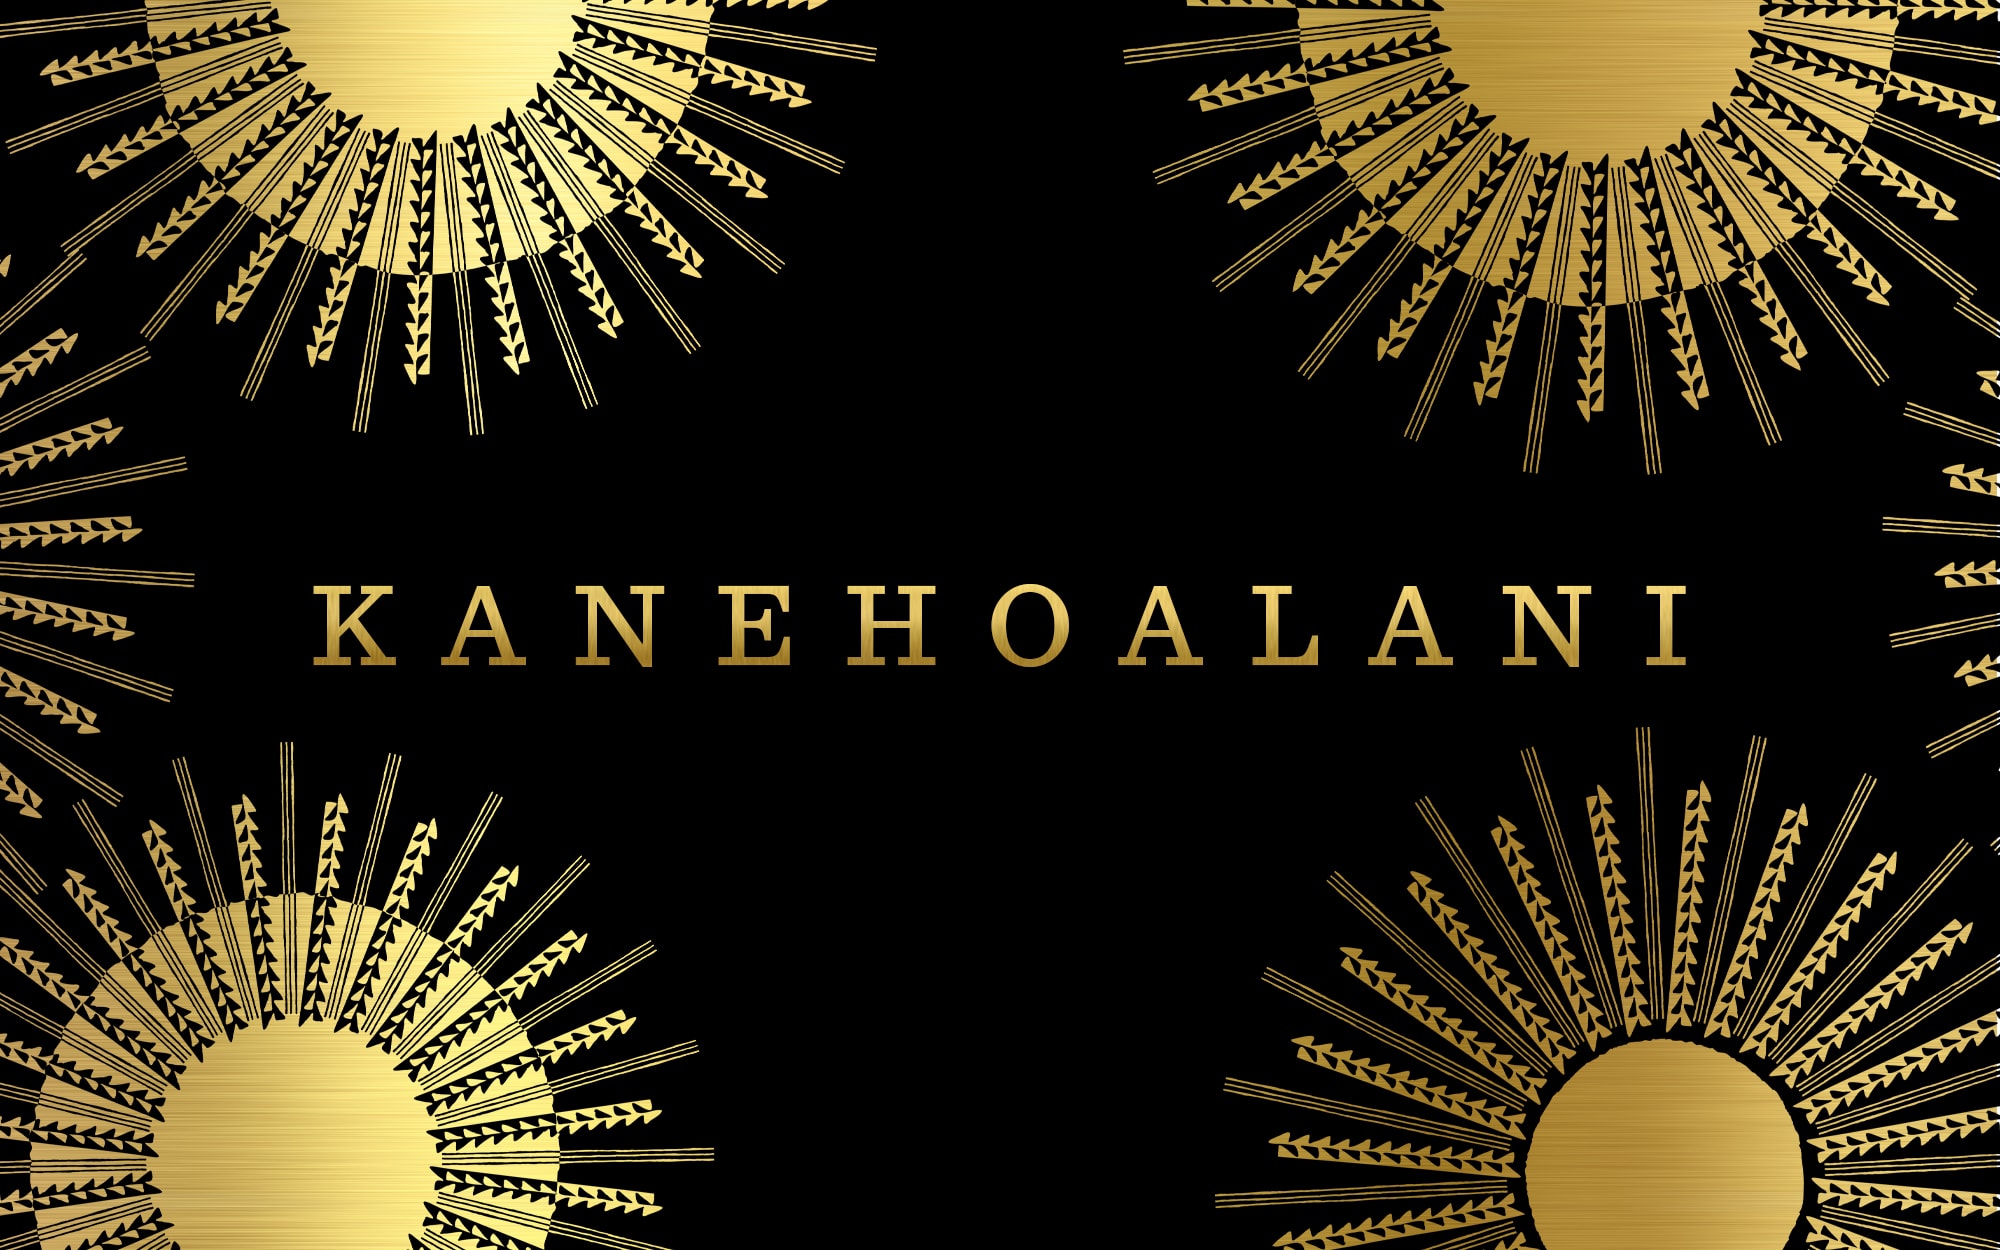 Kanehoalani Print Banner with gold lettering on a black background